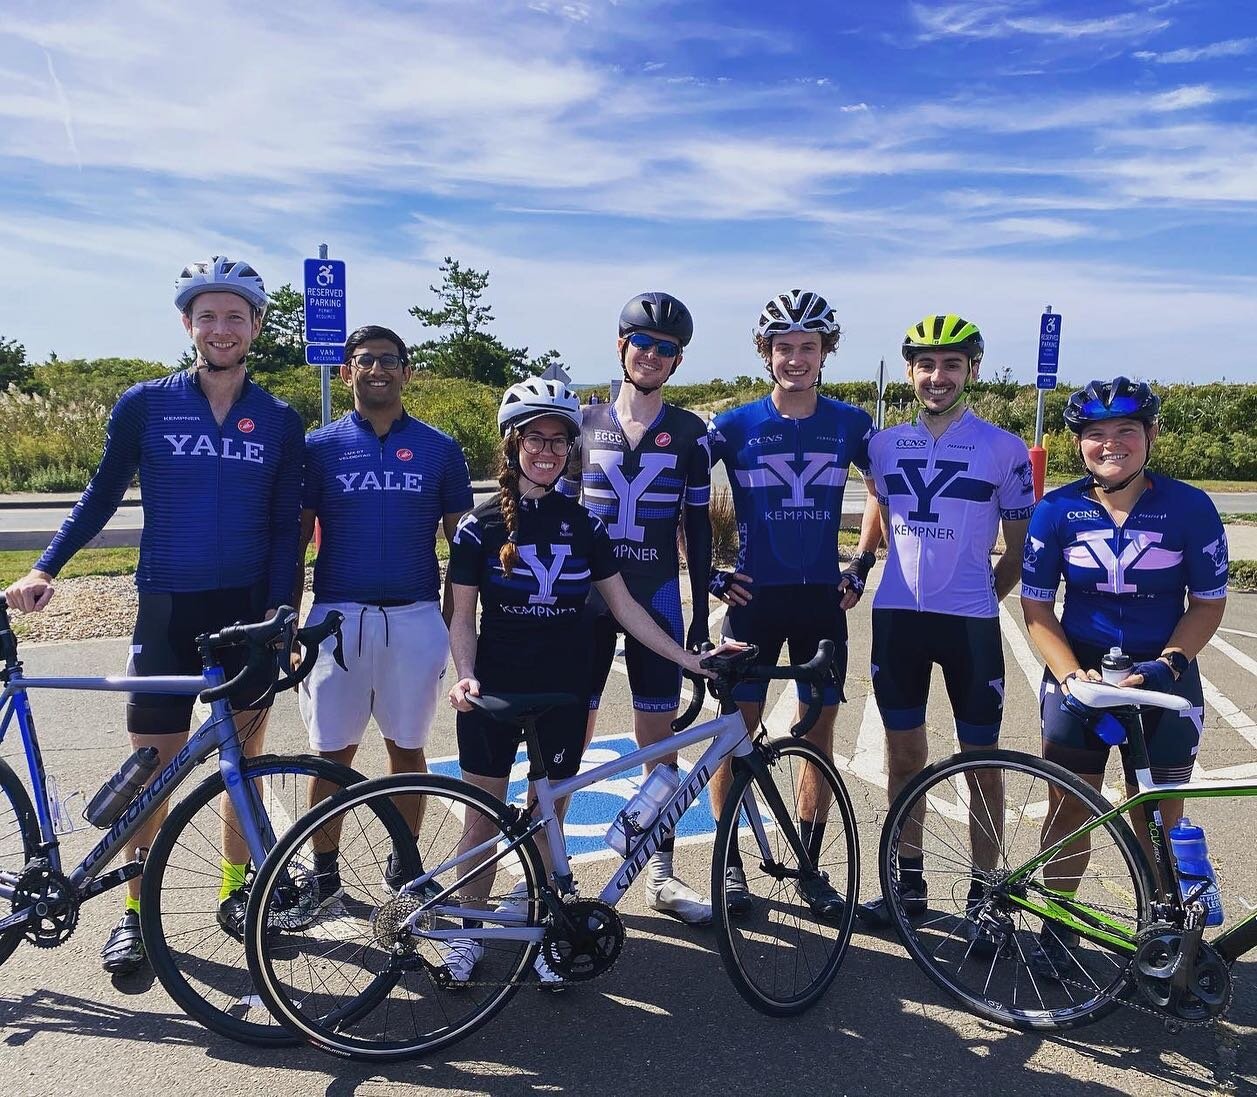 Last weekend was a busy one for Yale cyclists! Riders competed in both the first road race of the 2021-2022 season&mdash; the ConnectiCare Gran Fondo&mdash; and in the penultimate event of the mountain bike season&mdash; University of Vermont&rsquo;s